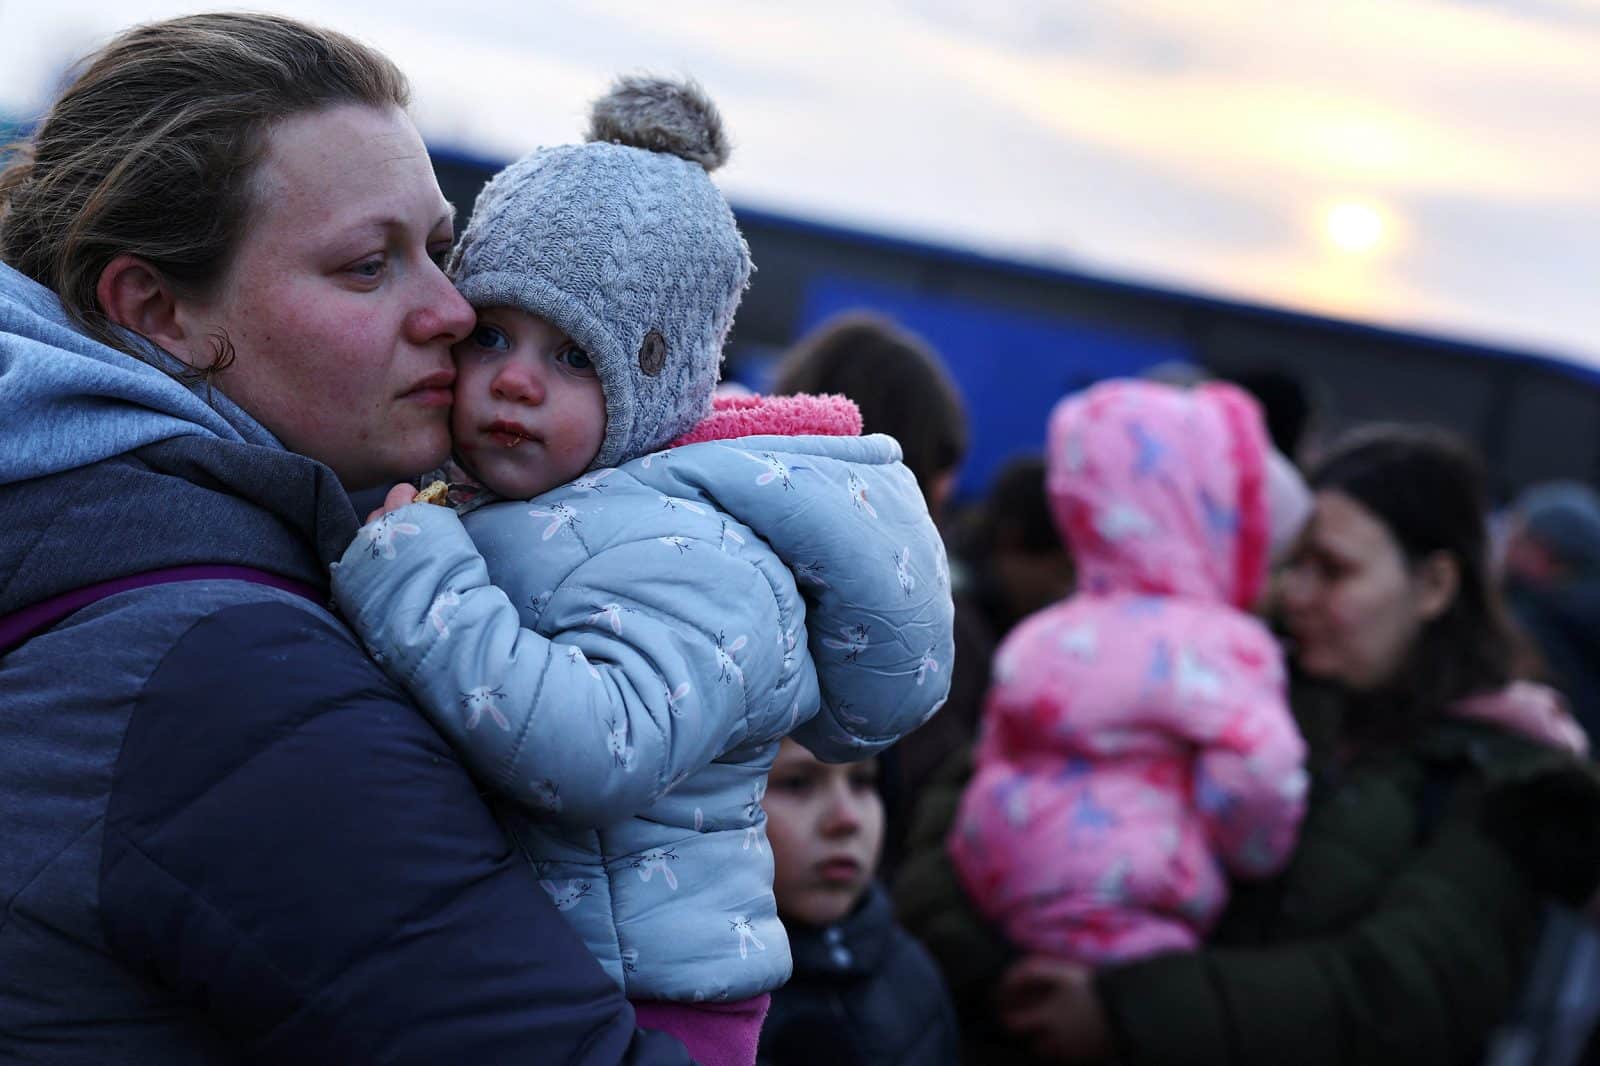 The EU will allocate 433 million euros for three countries to support Ukrainian refugees